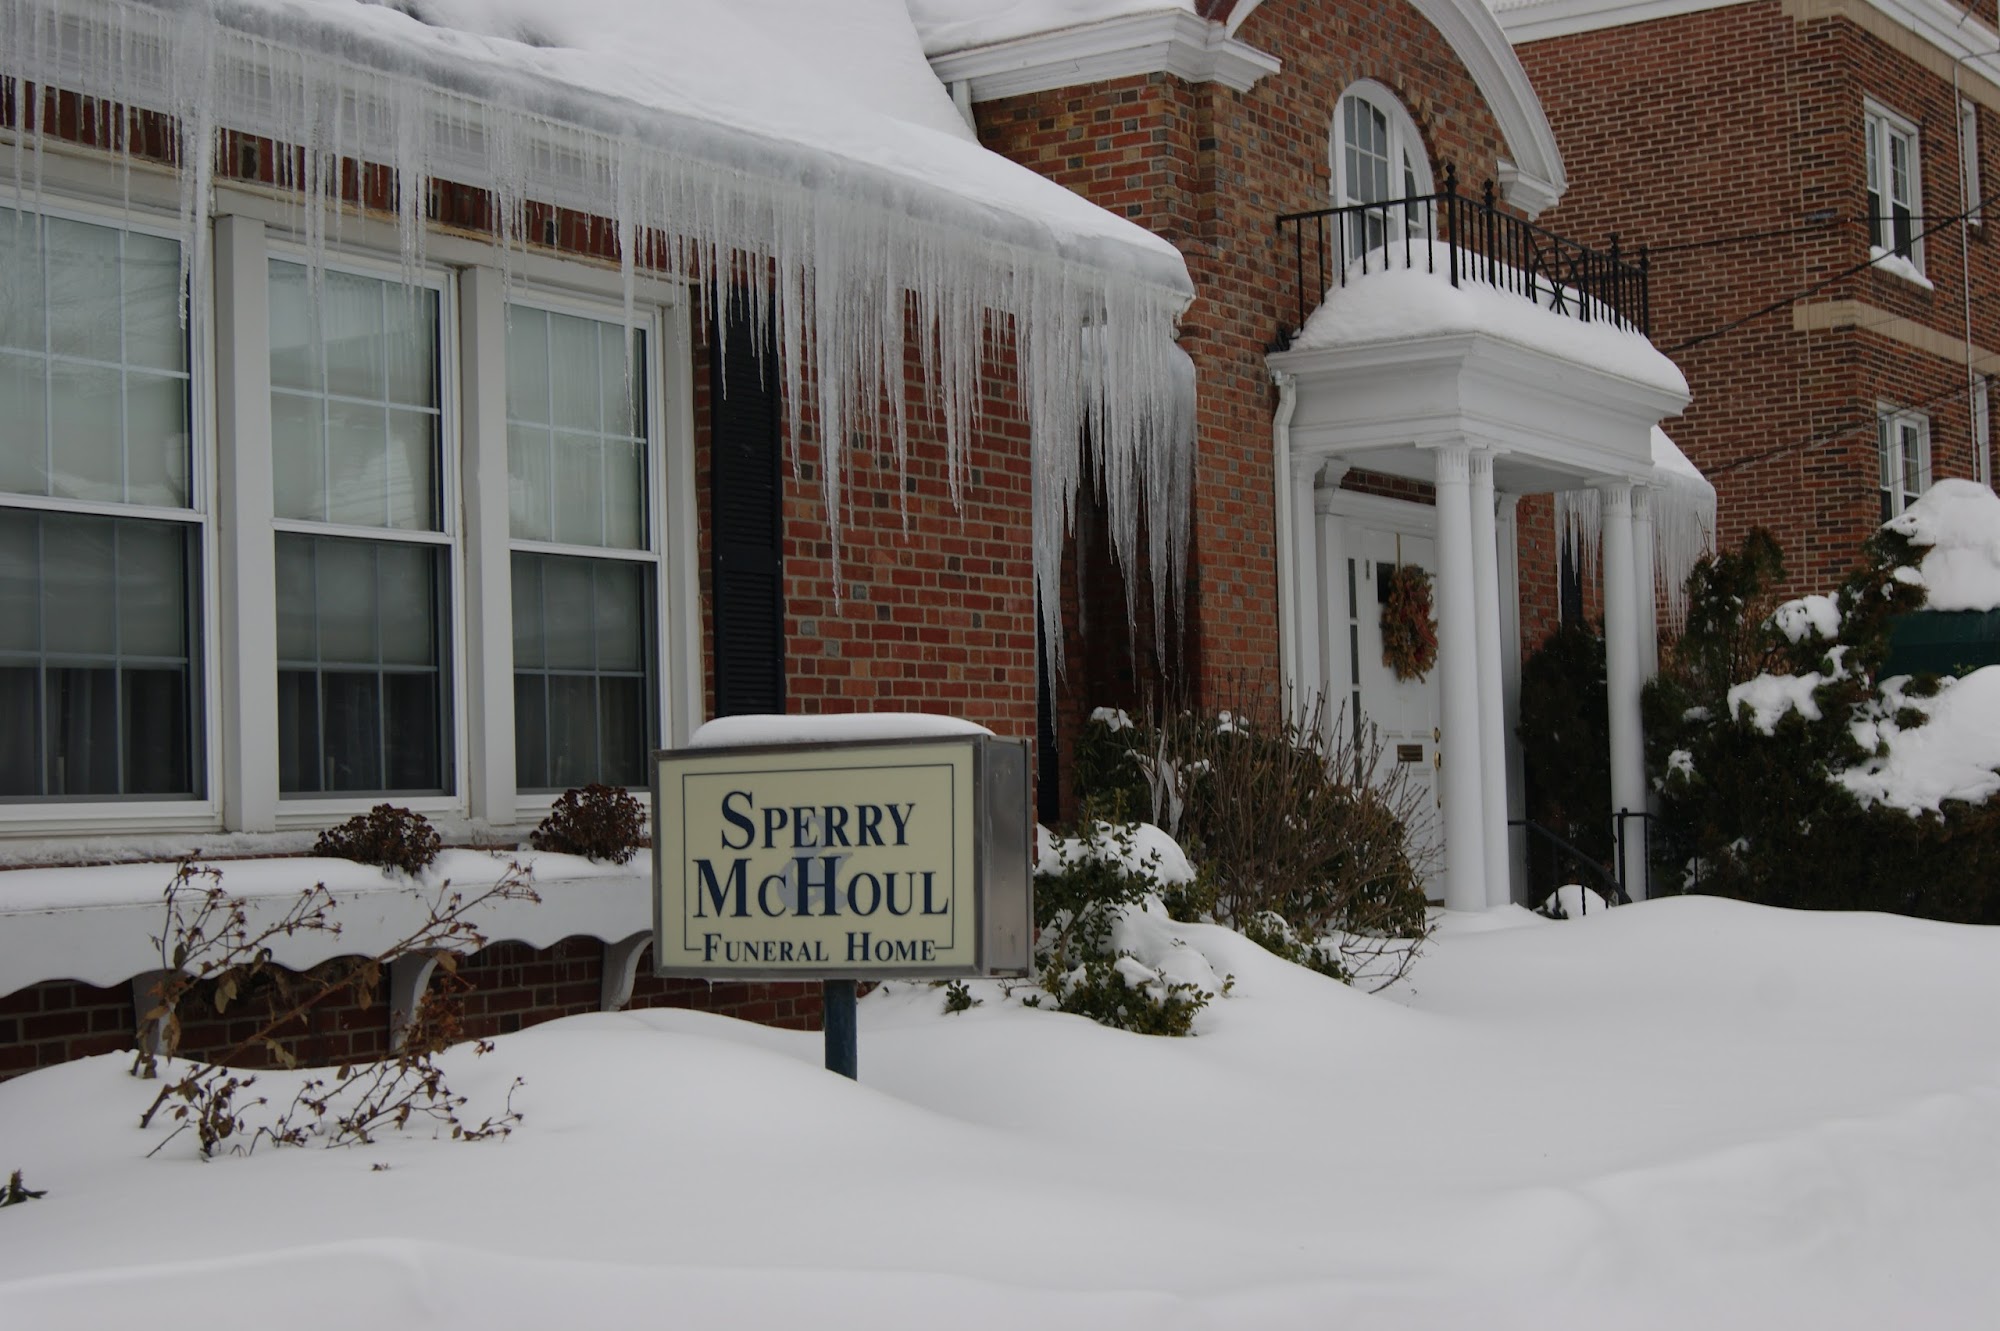 Sperry & McHoul Funeral Home